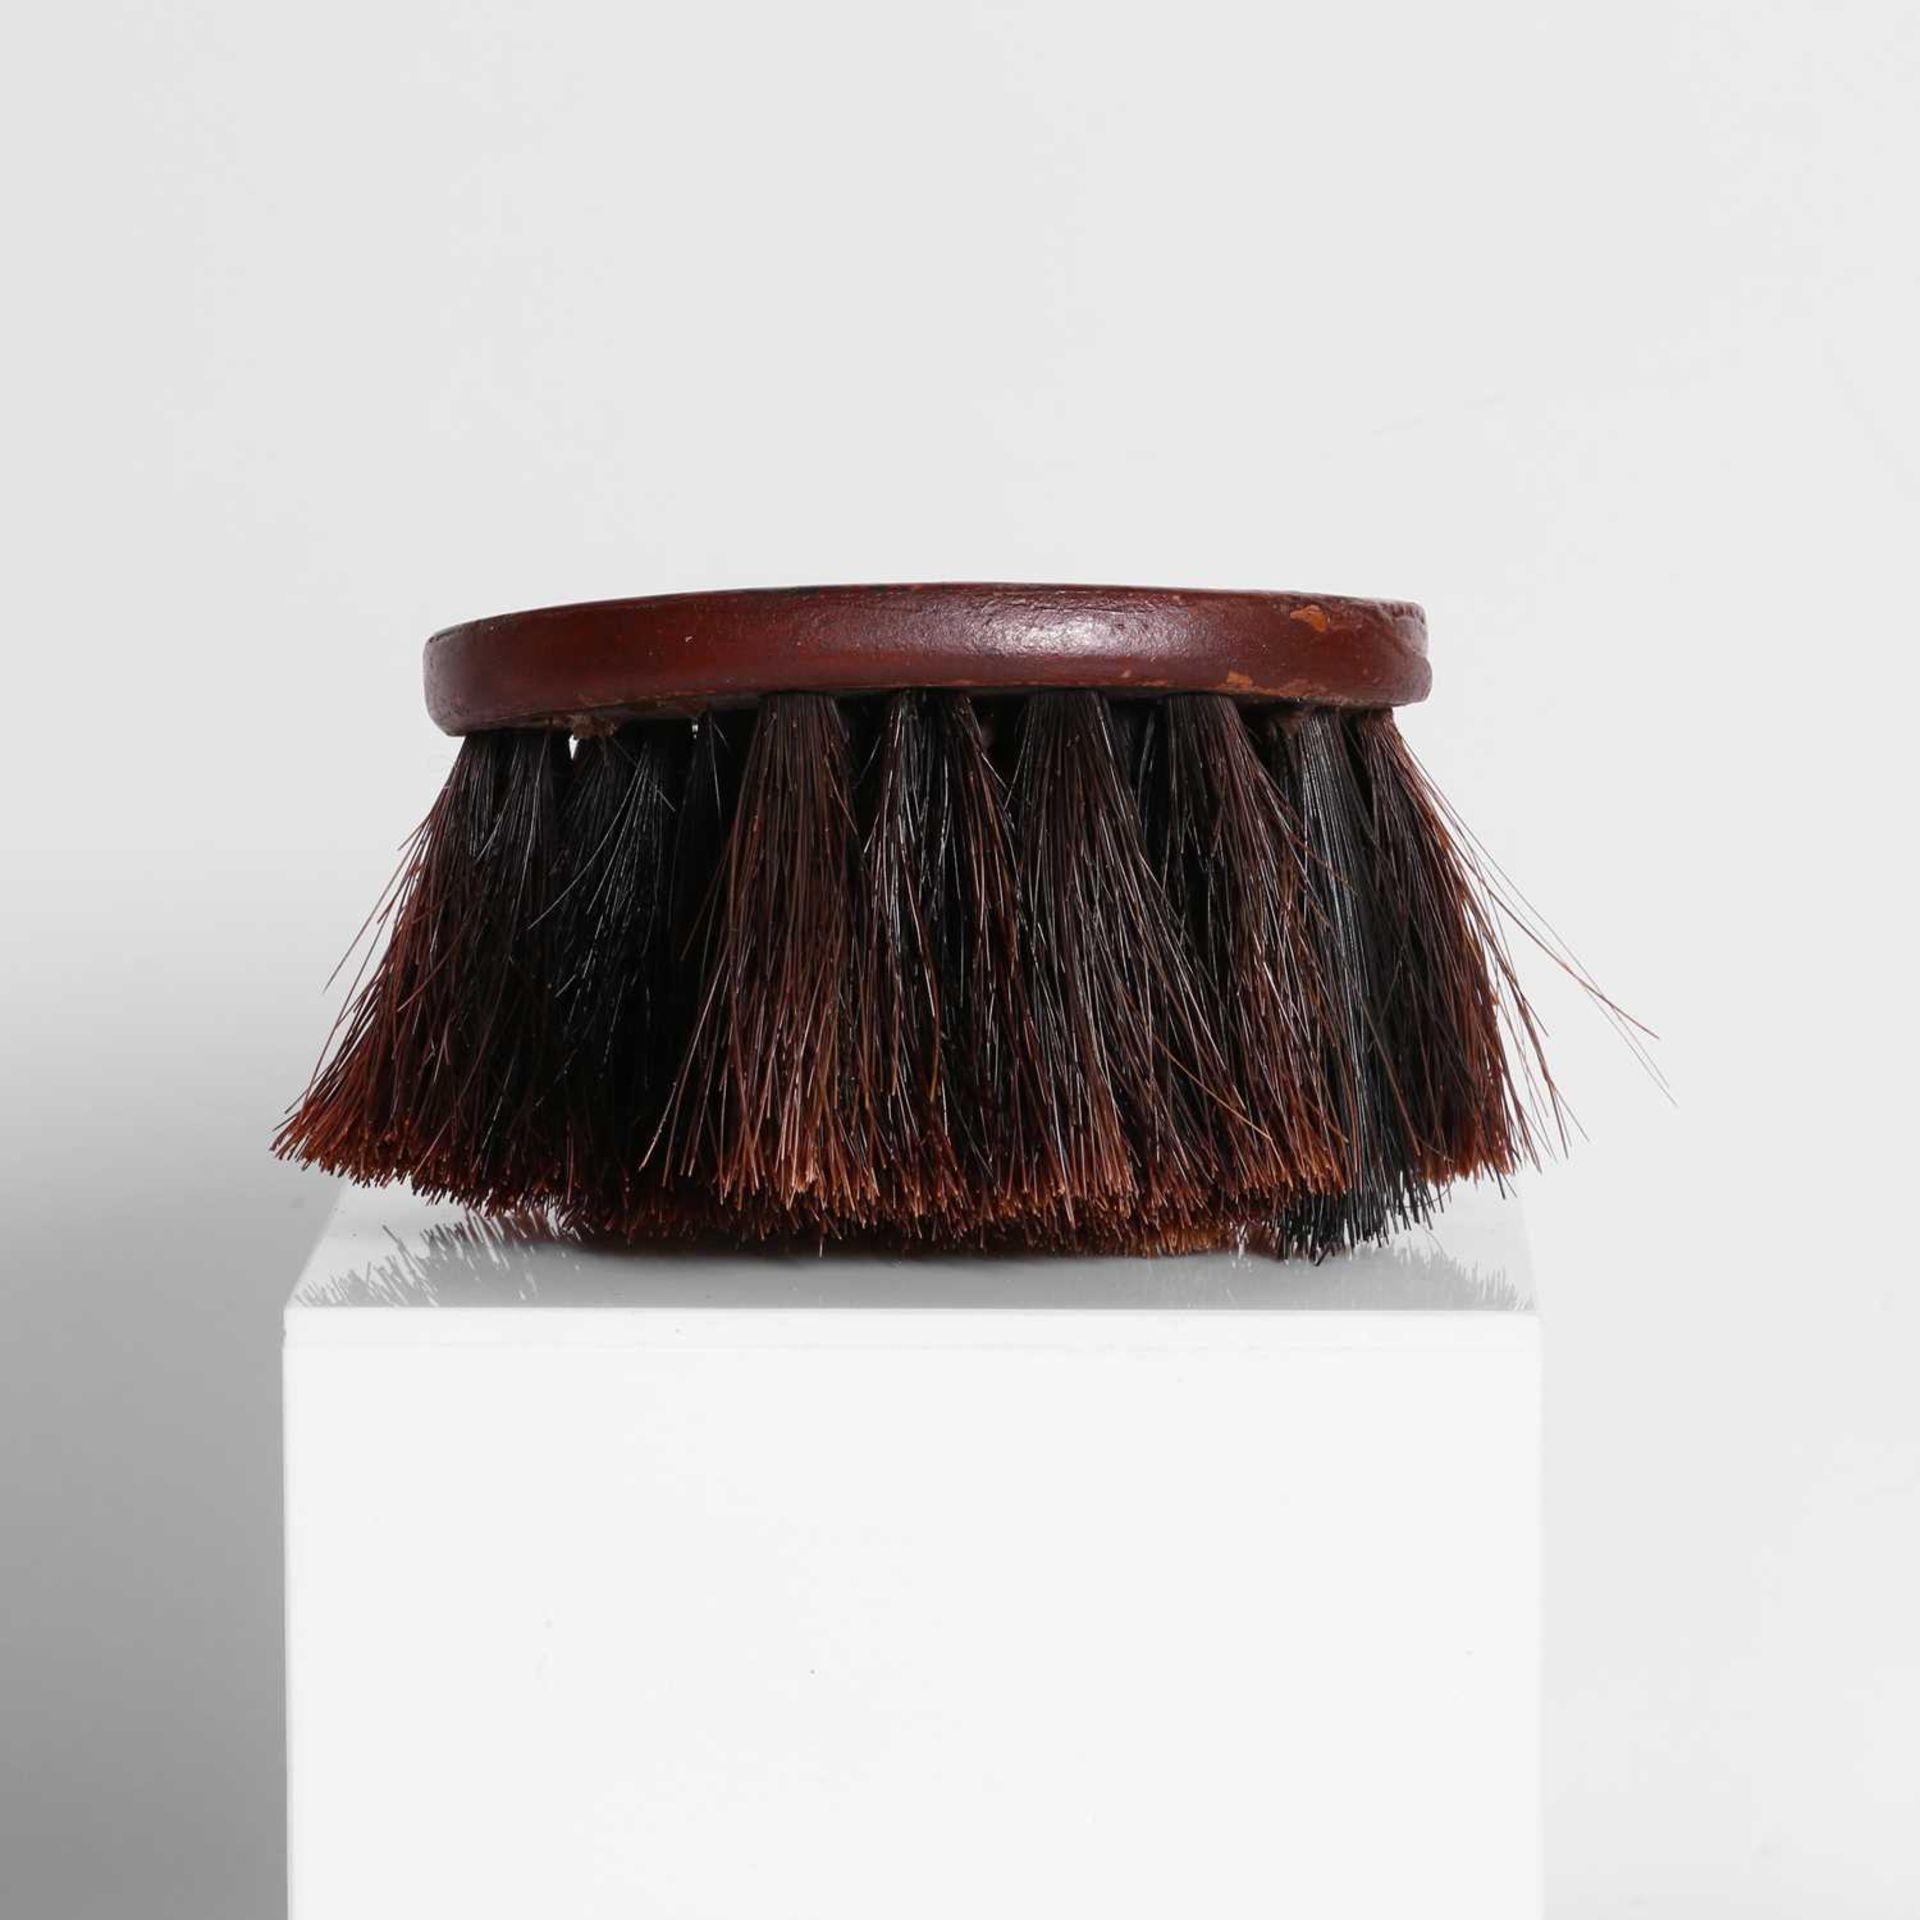 A specimen-wood-inlaid clothes brush, - Image 4 of 22